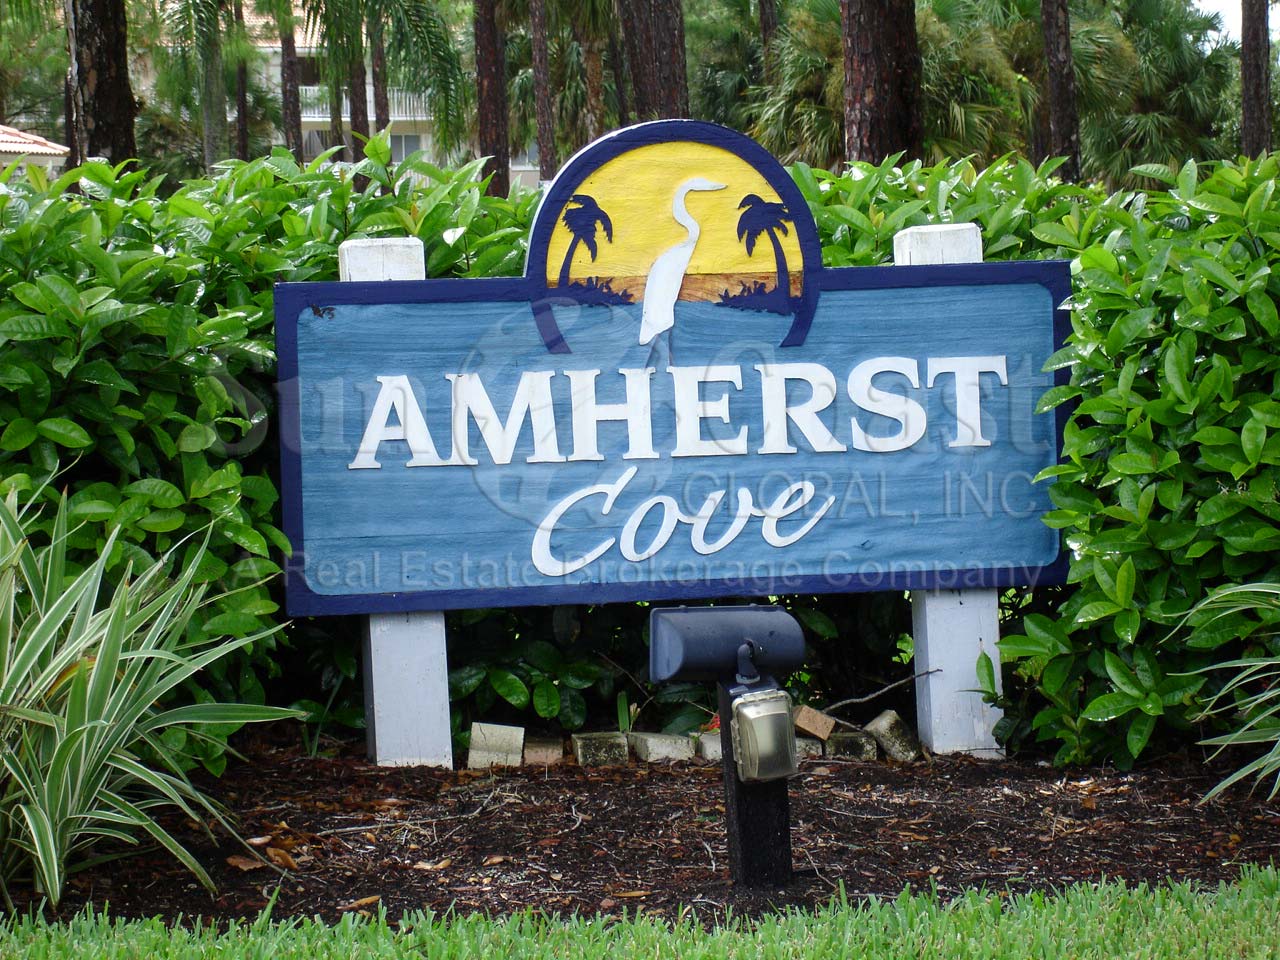 Amherst Cove signage